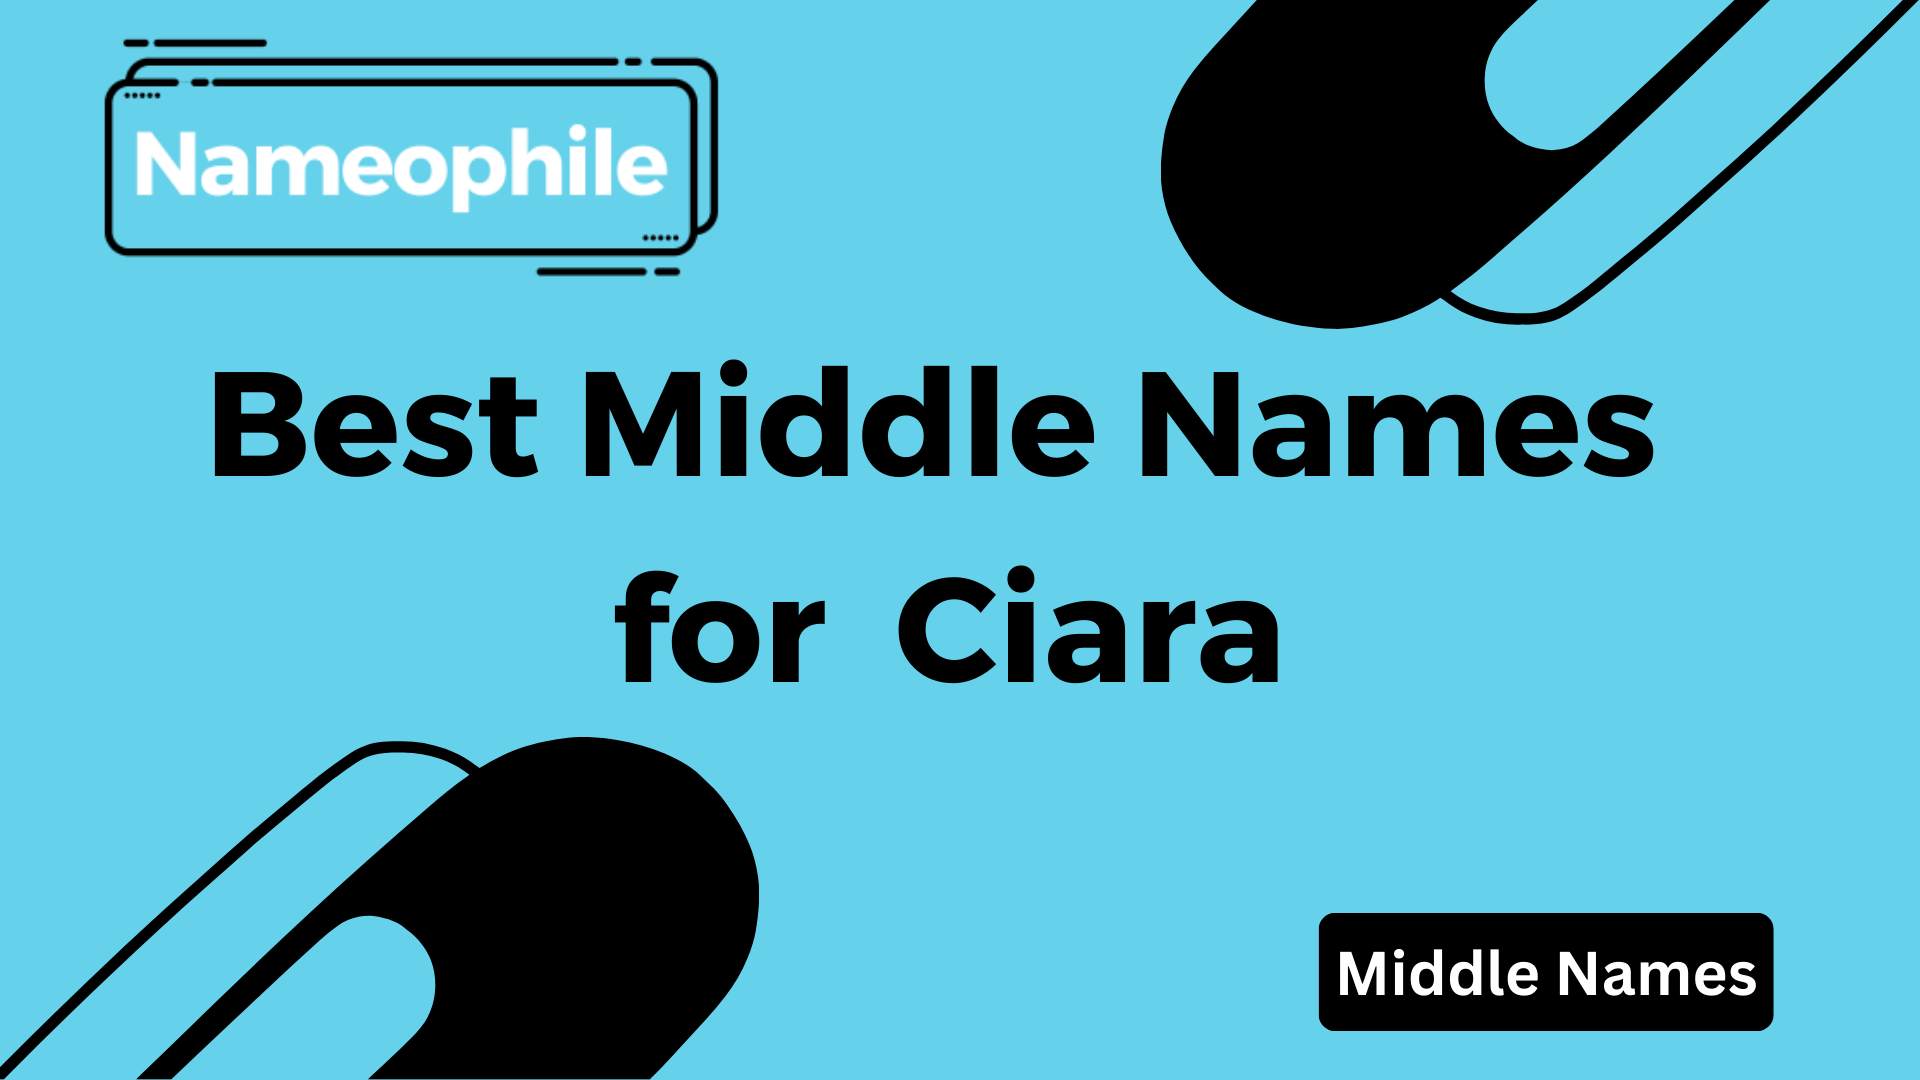 Best Middle Names for Ciara